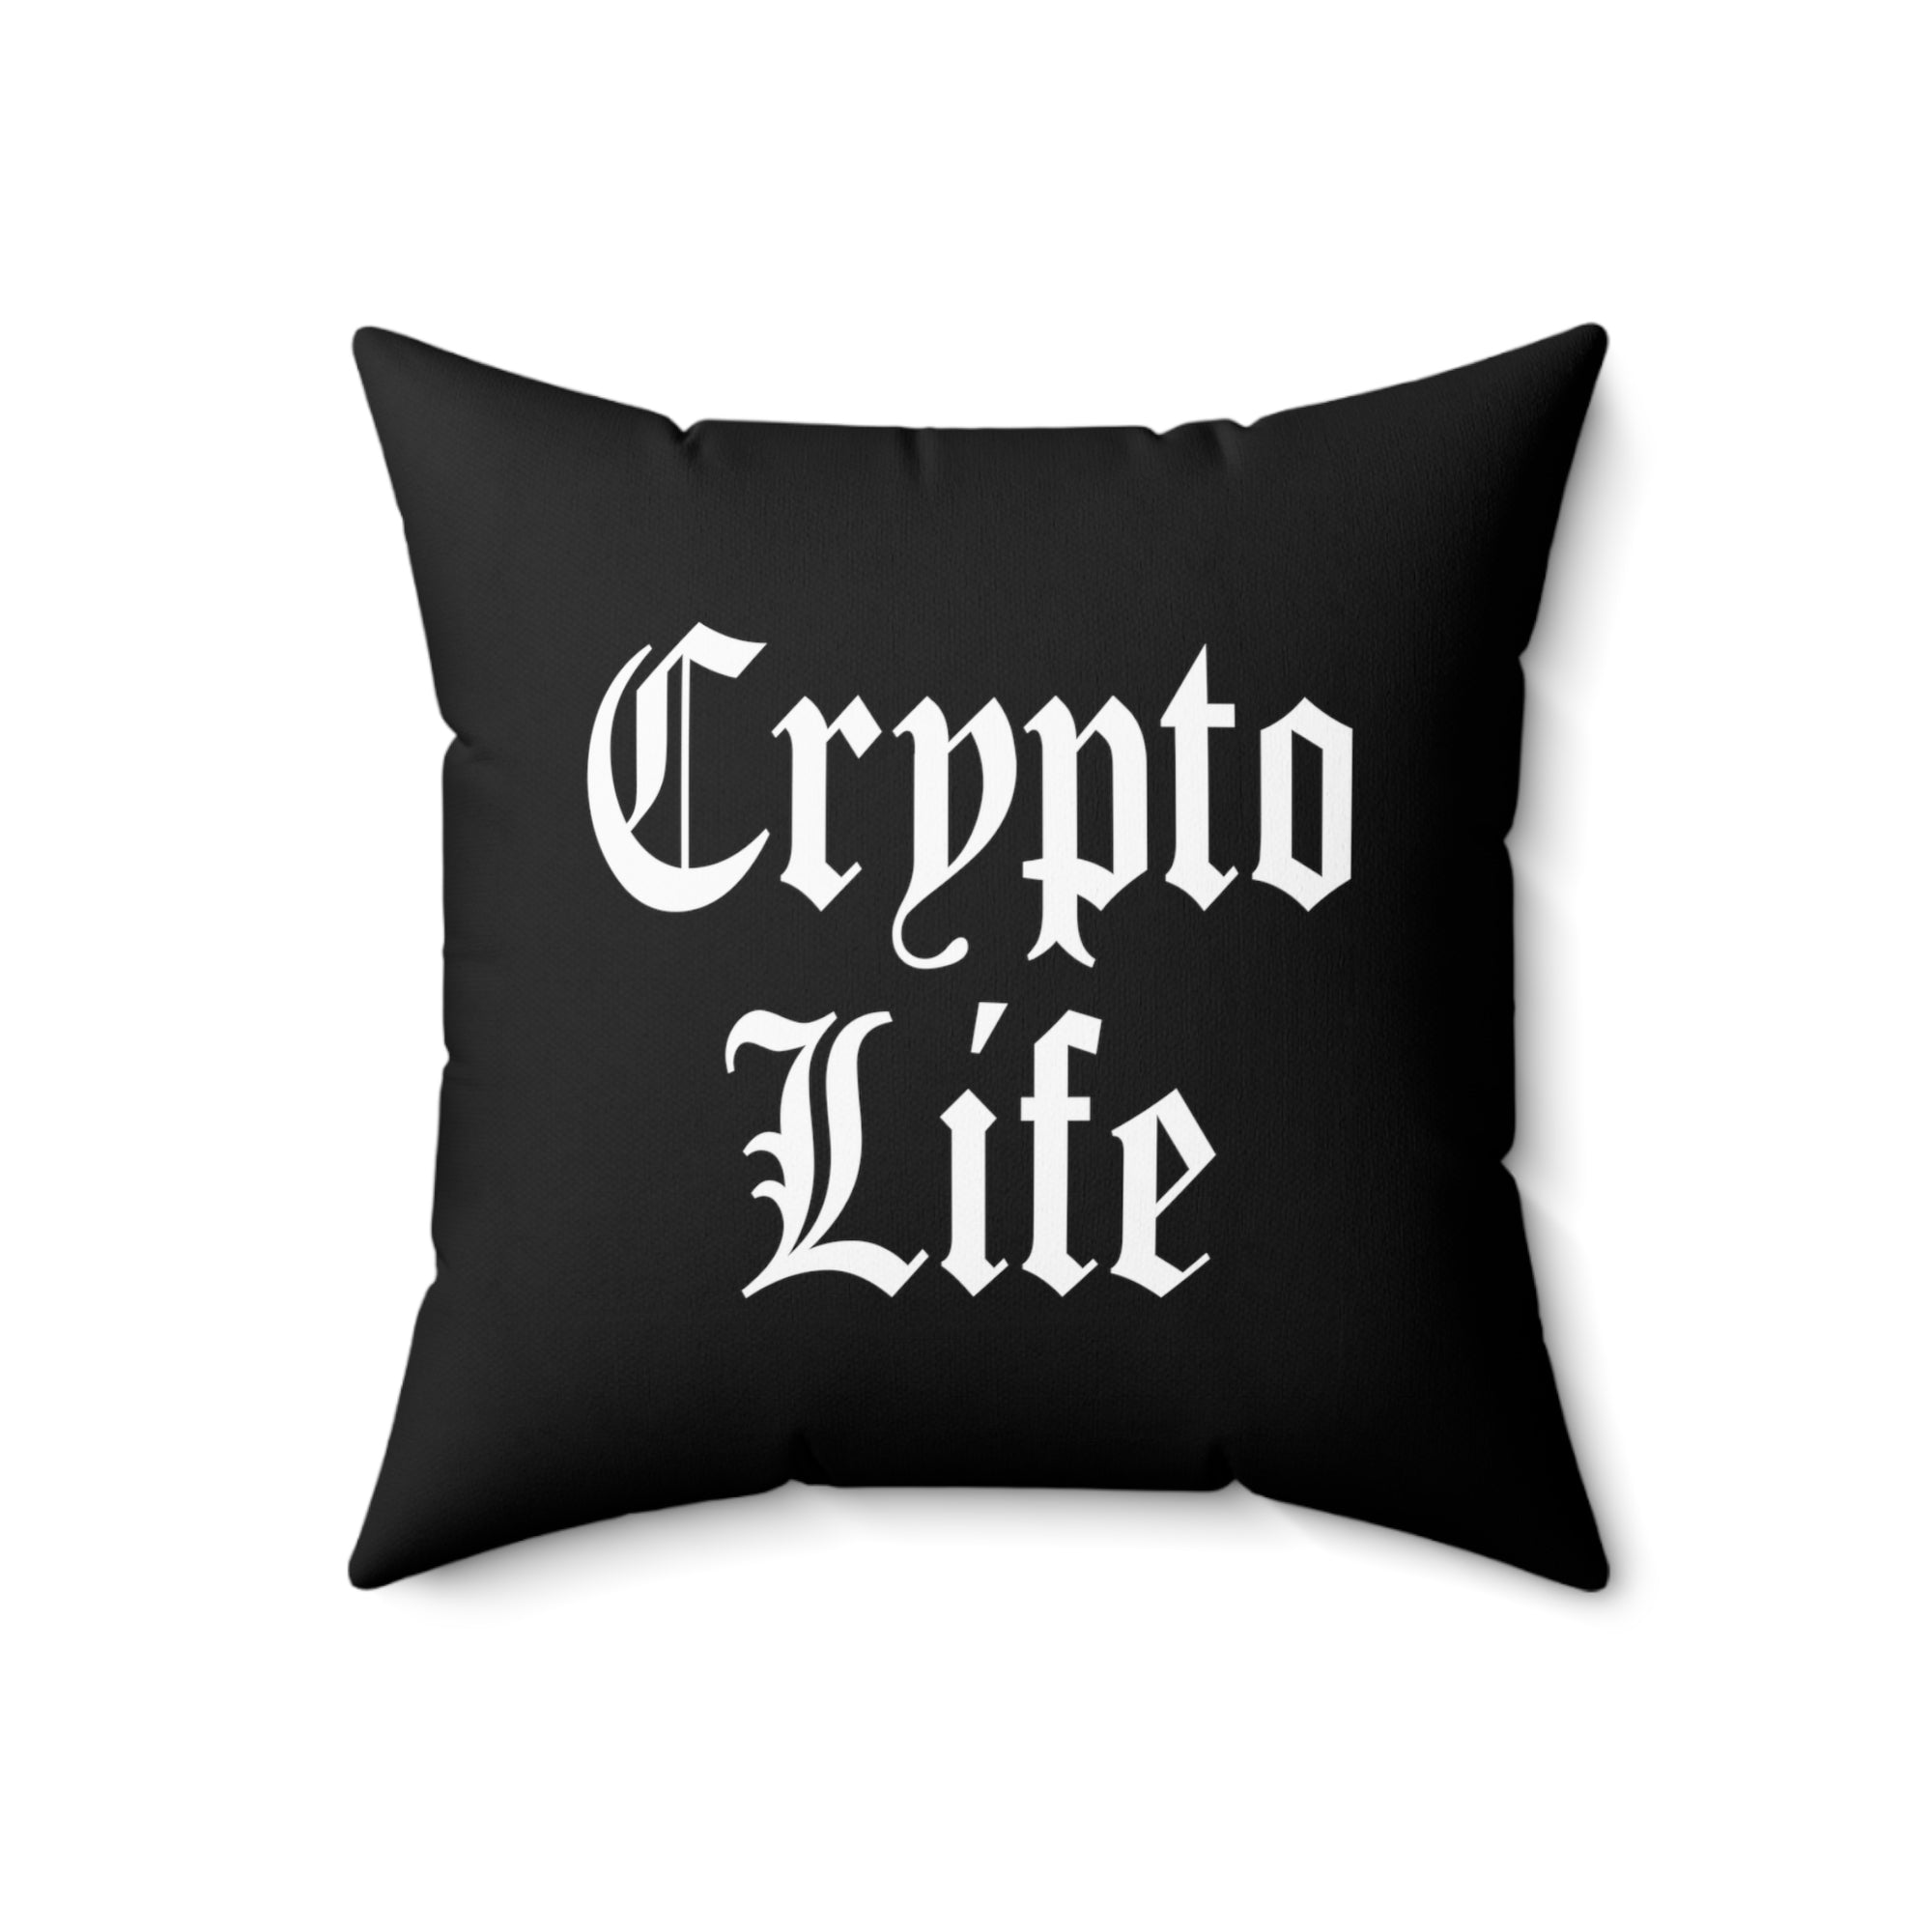 Cryptocurrency Gift Ideas - Crypto Life Pillow. Close Up View.